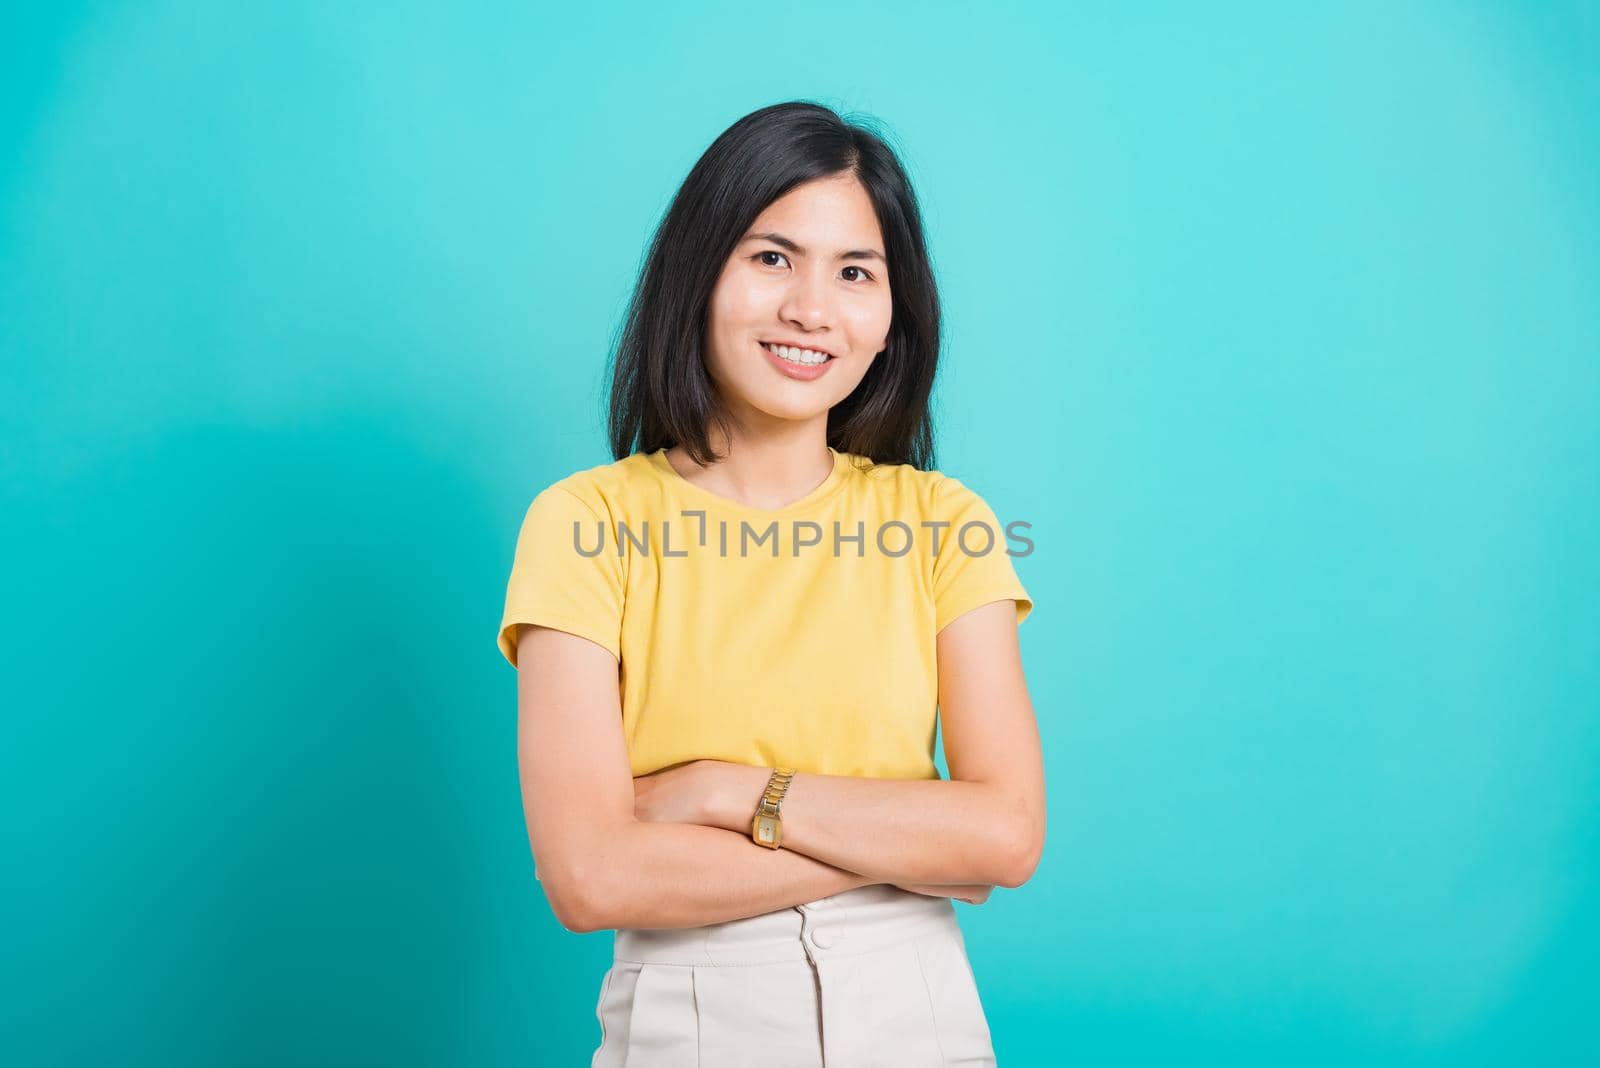 Portrait Asian beautiful young woman standing smile seeing white teeth, She crossed her arms and looking at camera, shoot photo in studio on blue background. copy space to put text on left-hand side.